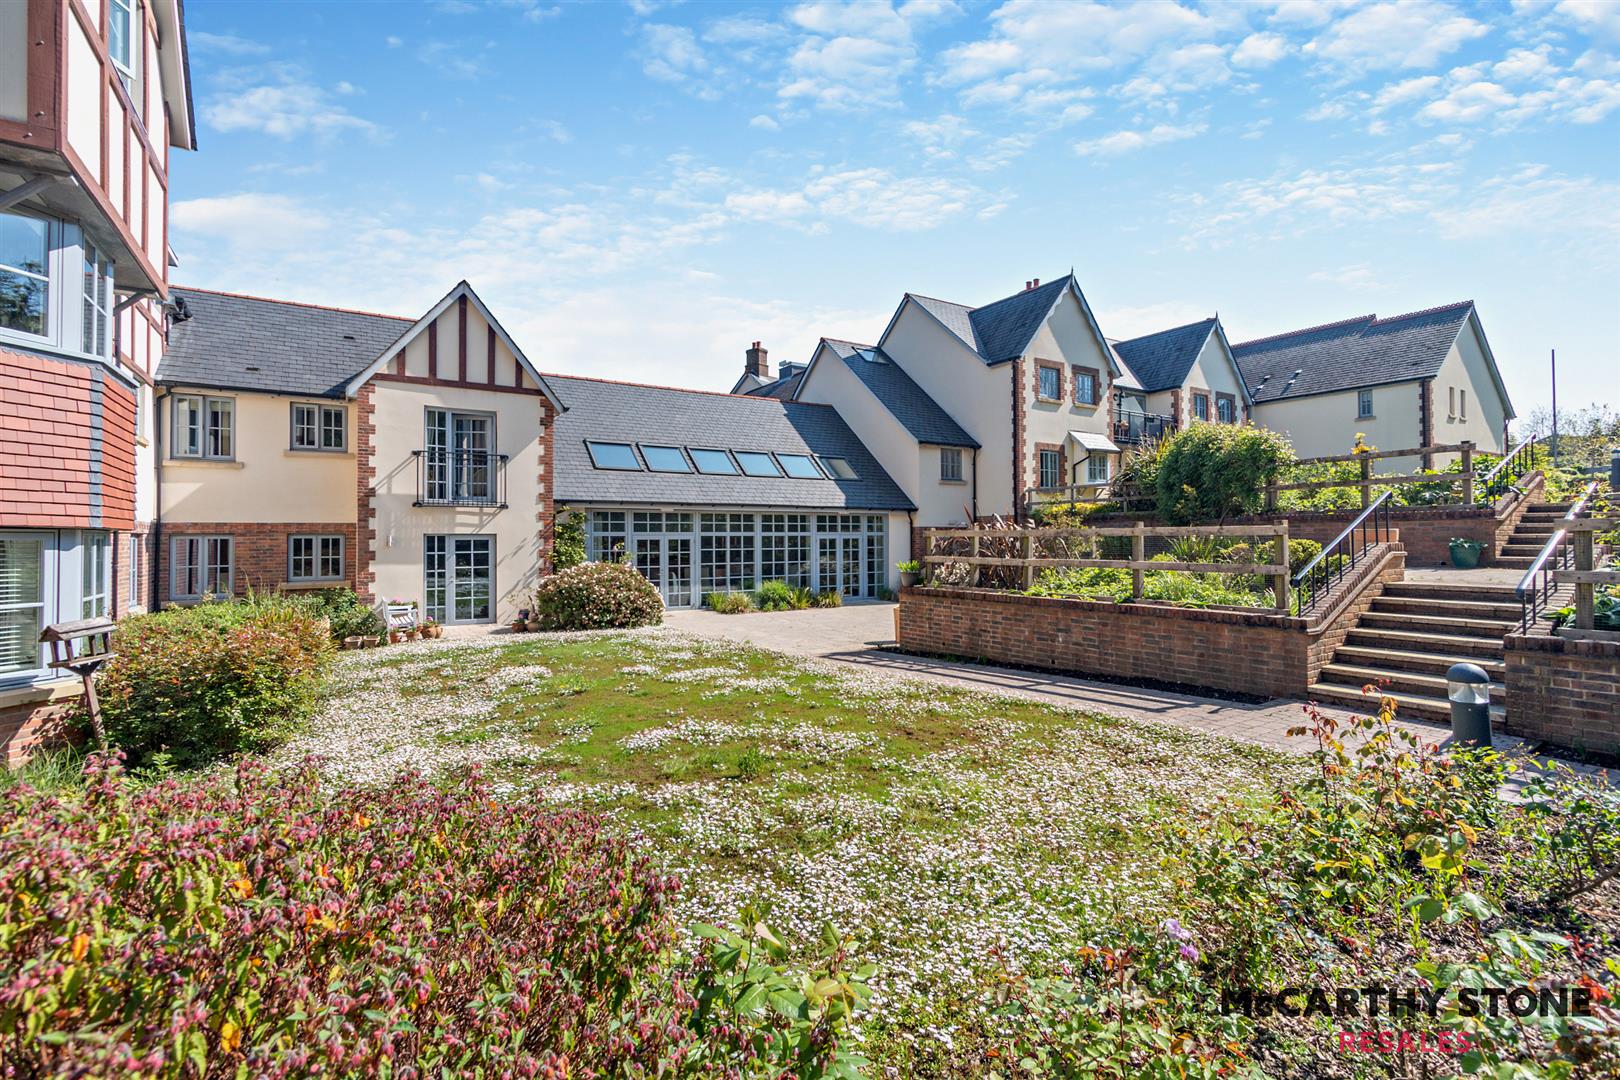 Silver Sands Court, Church Road, Bembridge, Isle of Wight, PO35 5AA